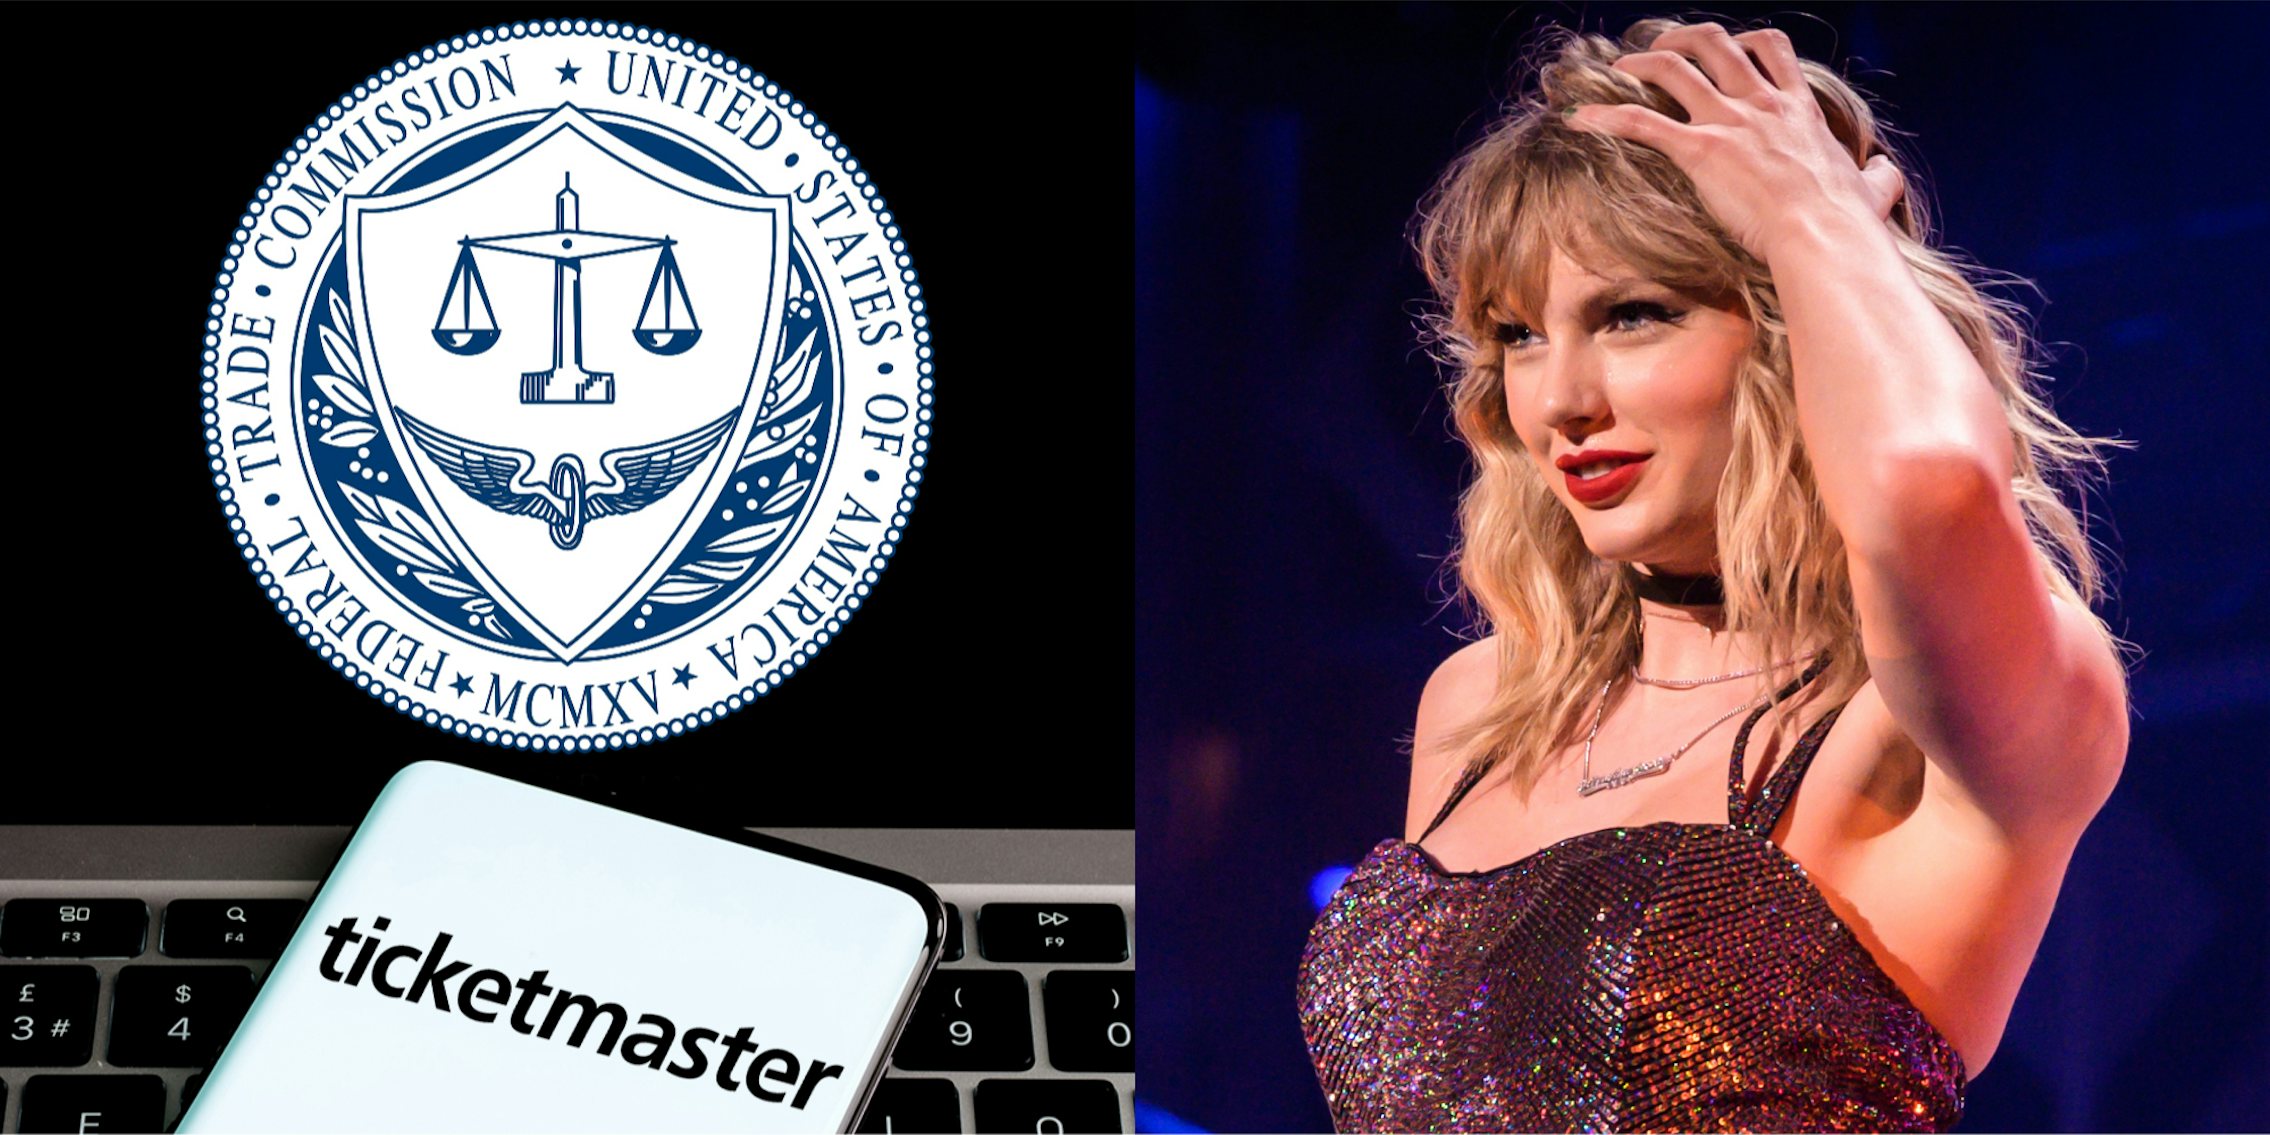 FTC logo on laptop screen with phone on keyboard displaying Ticketmaster logo (l) Taylor Swift in front of blue background (r)